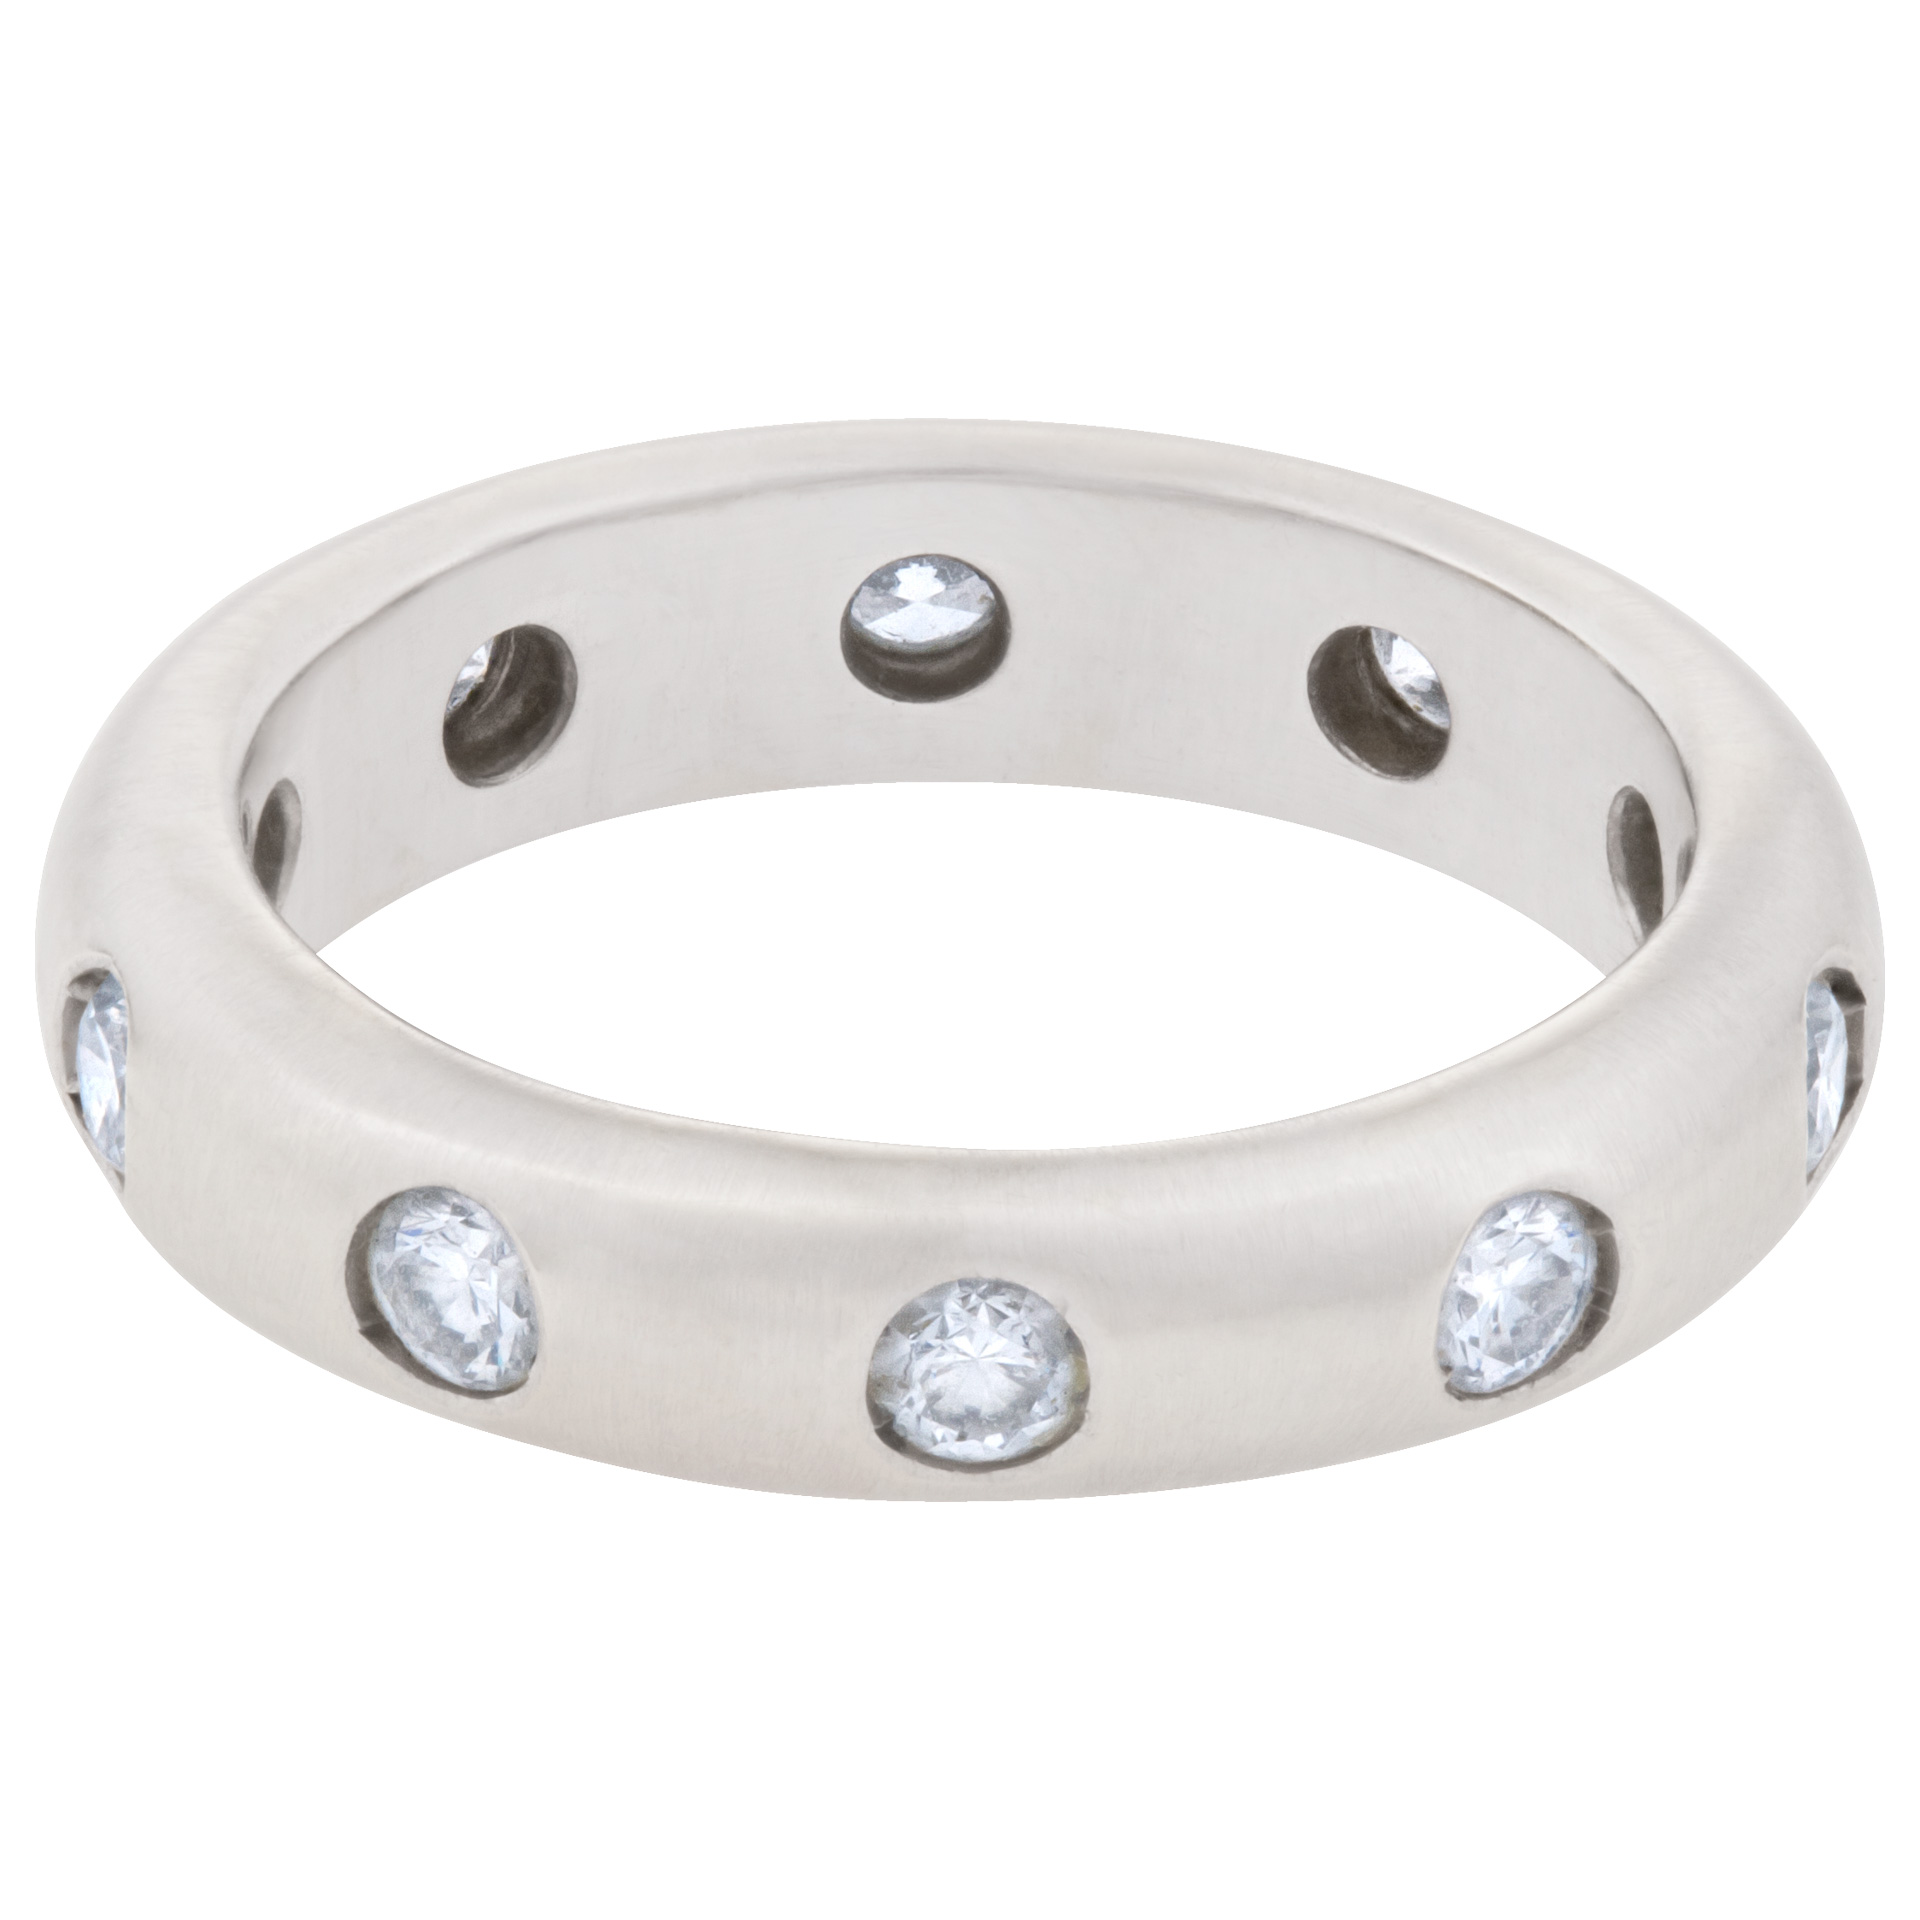 Sparkling 18k matte white gold band with diamonds. 1.00 carats. Size 6